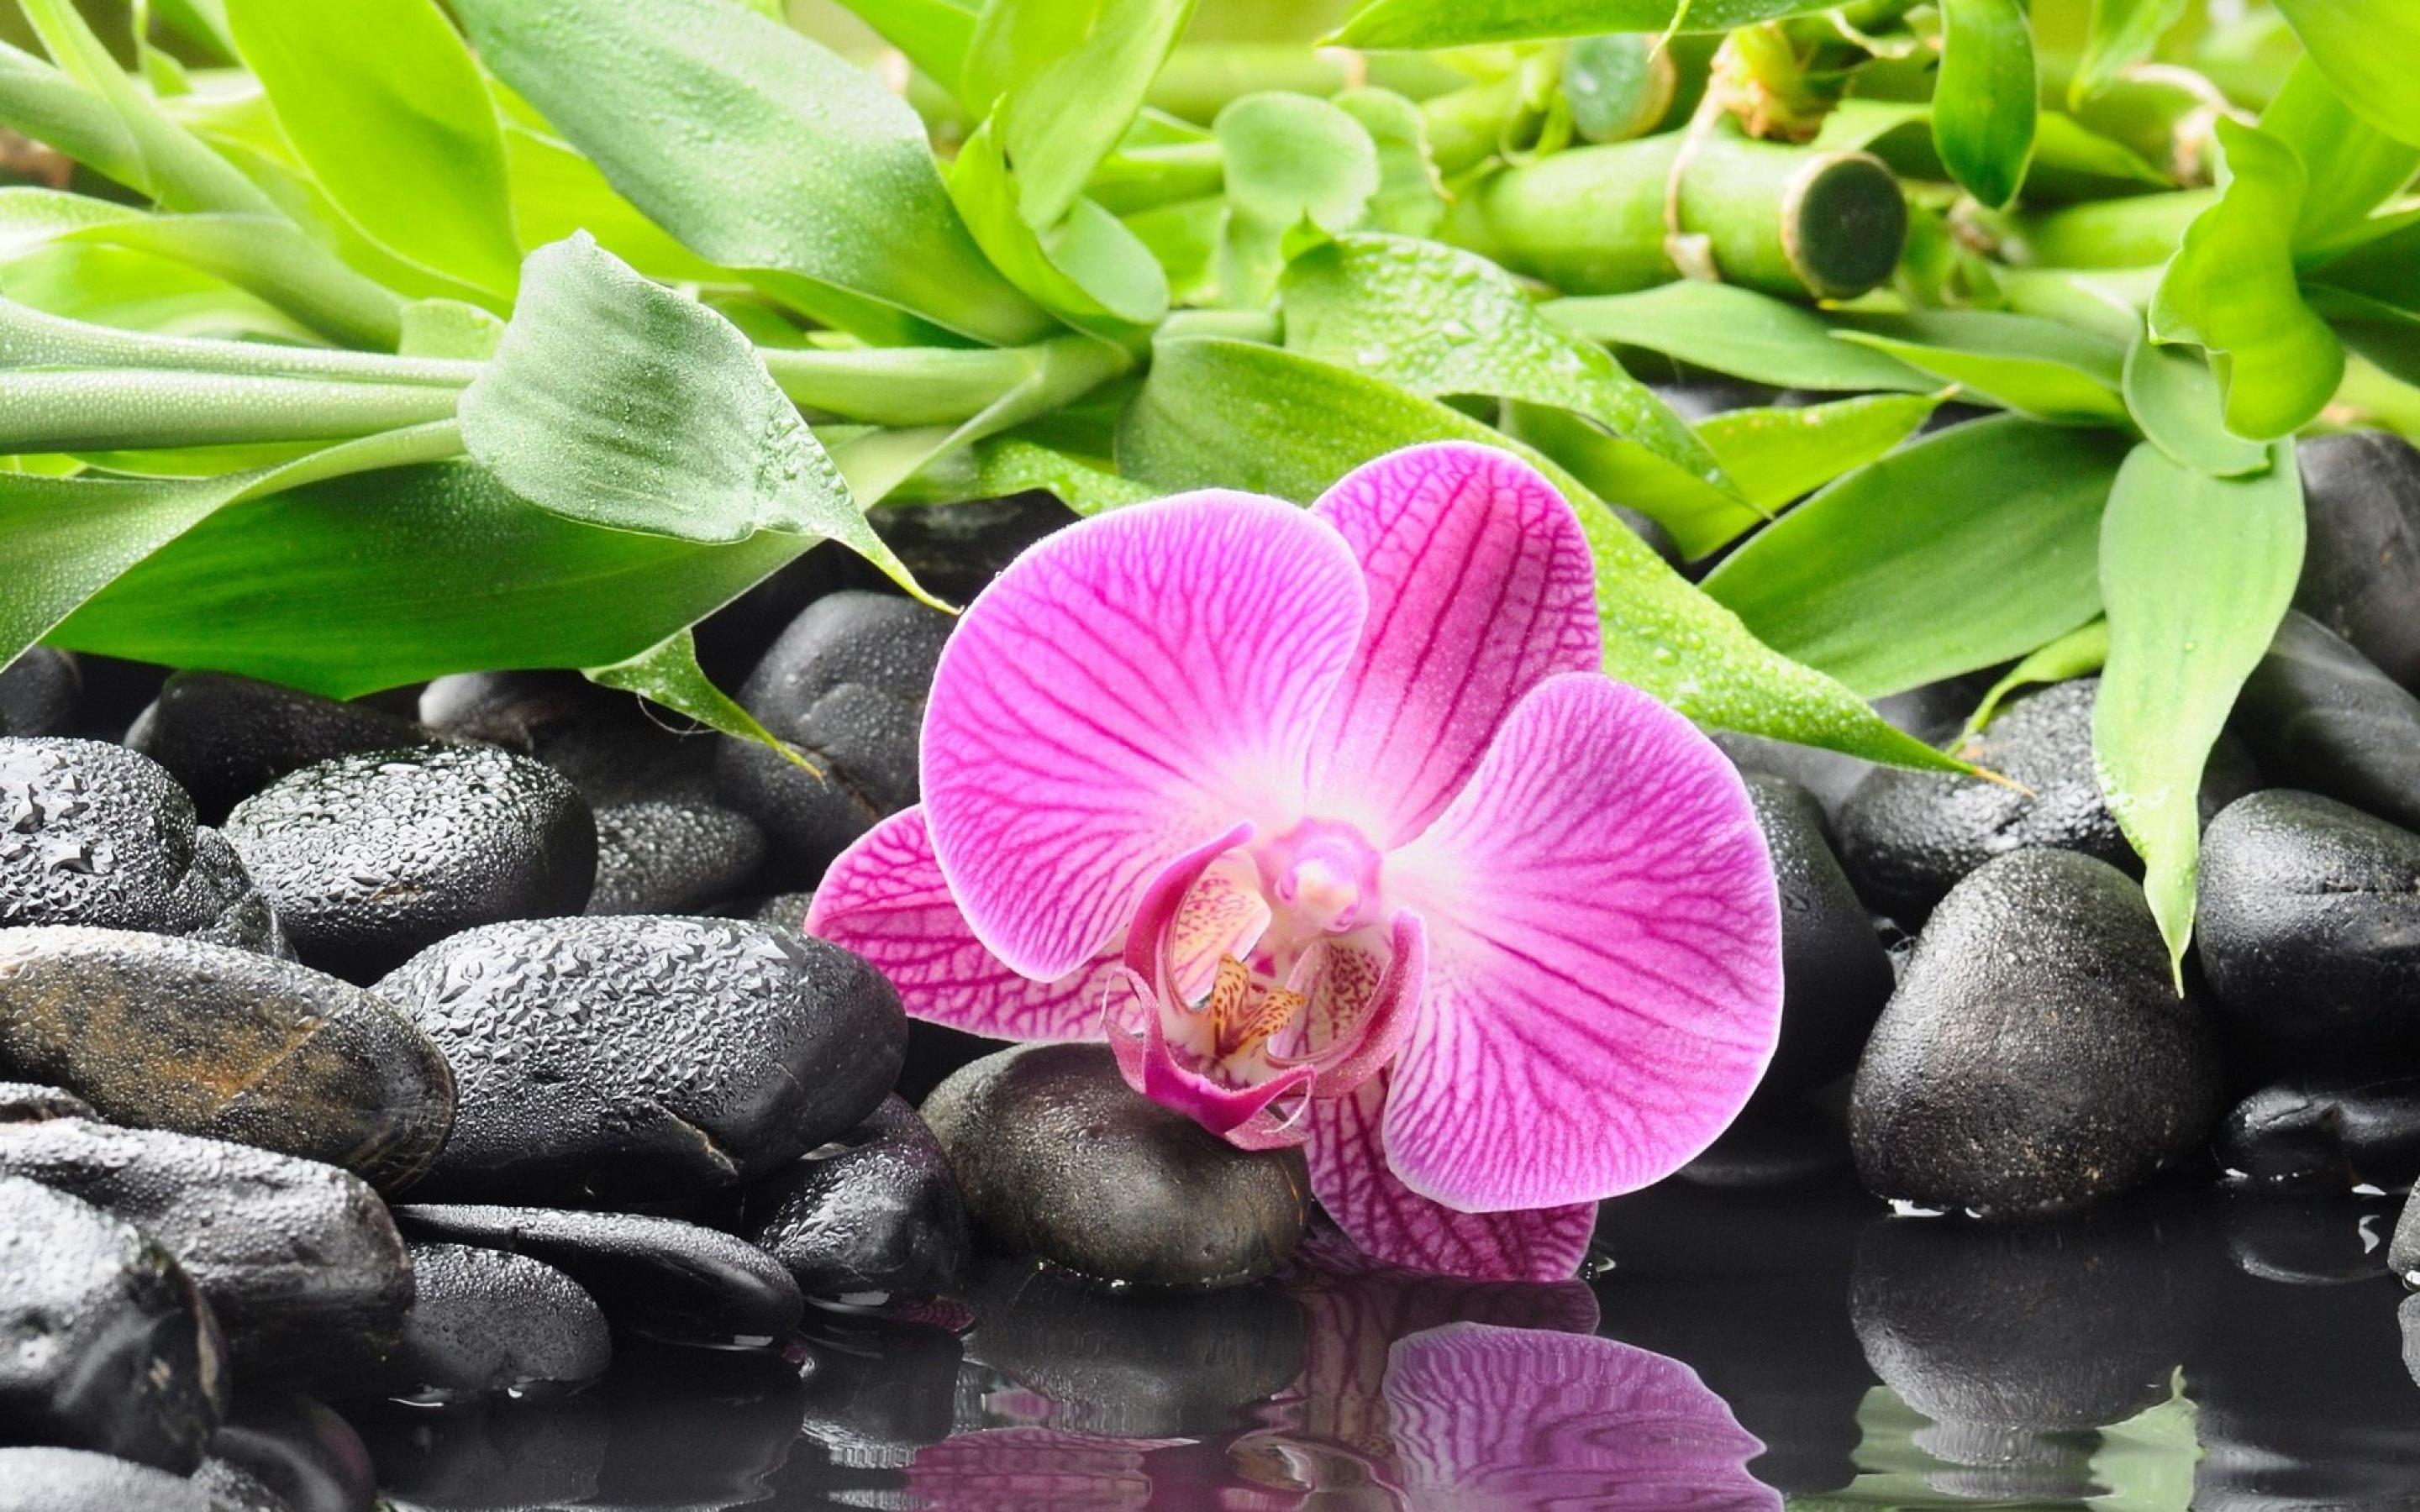 Orchid Wallpapers - Wallpaper Cave